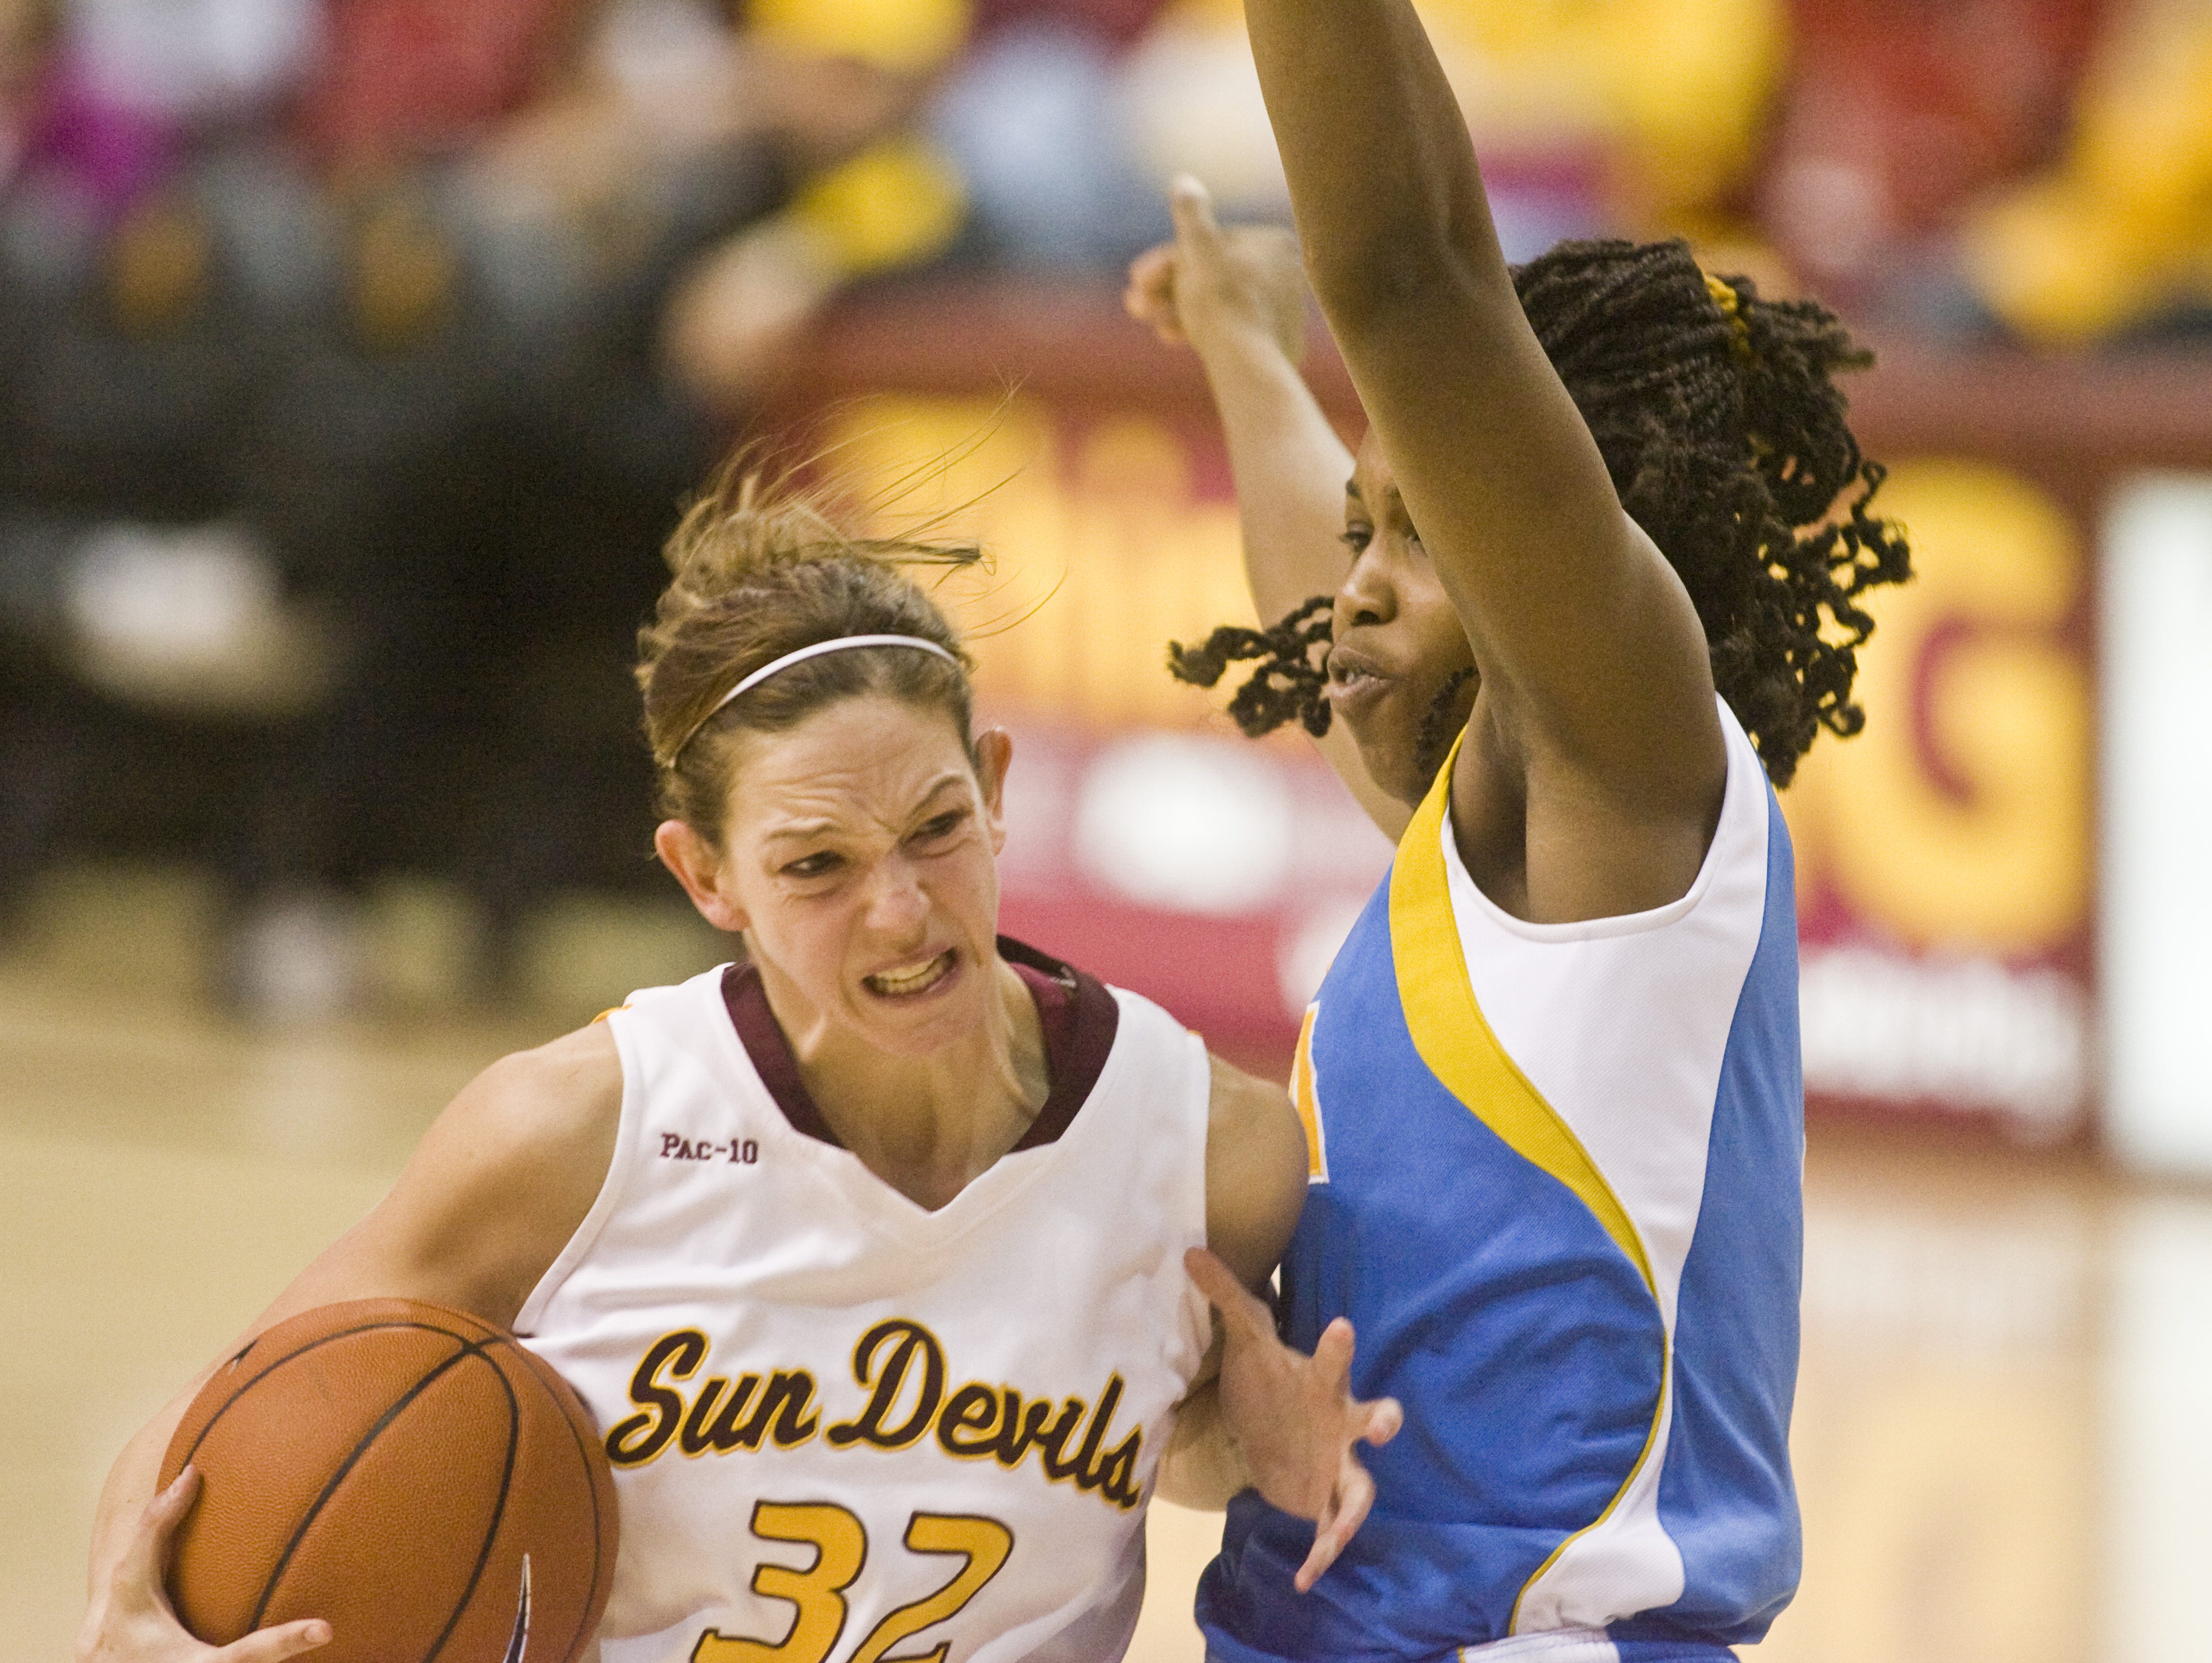 After ASU, Becca Tobin played for teams in several countries in Europe.